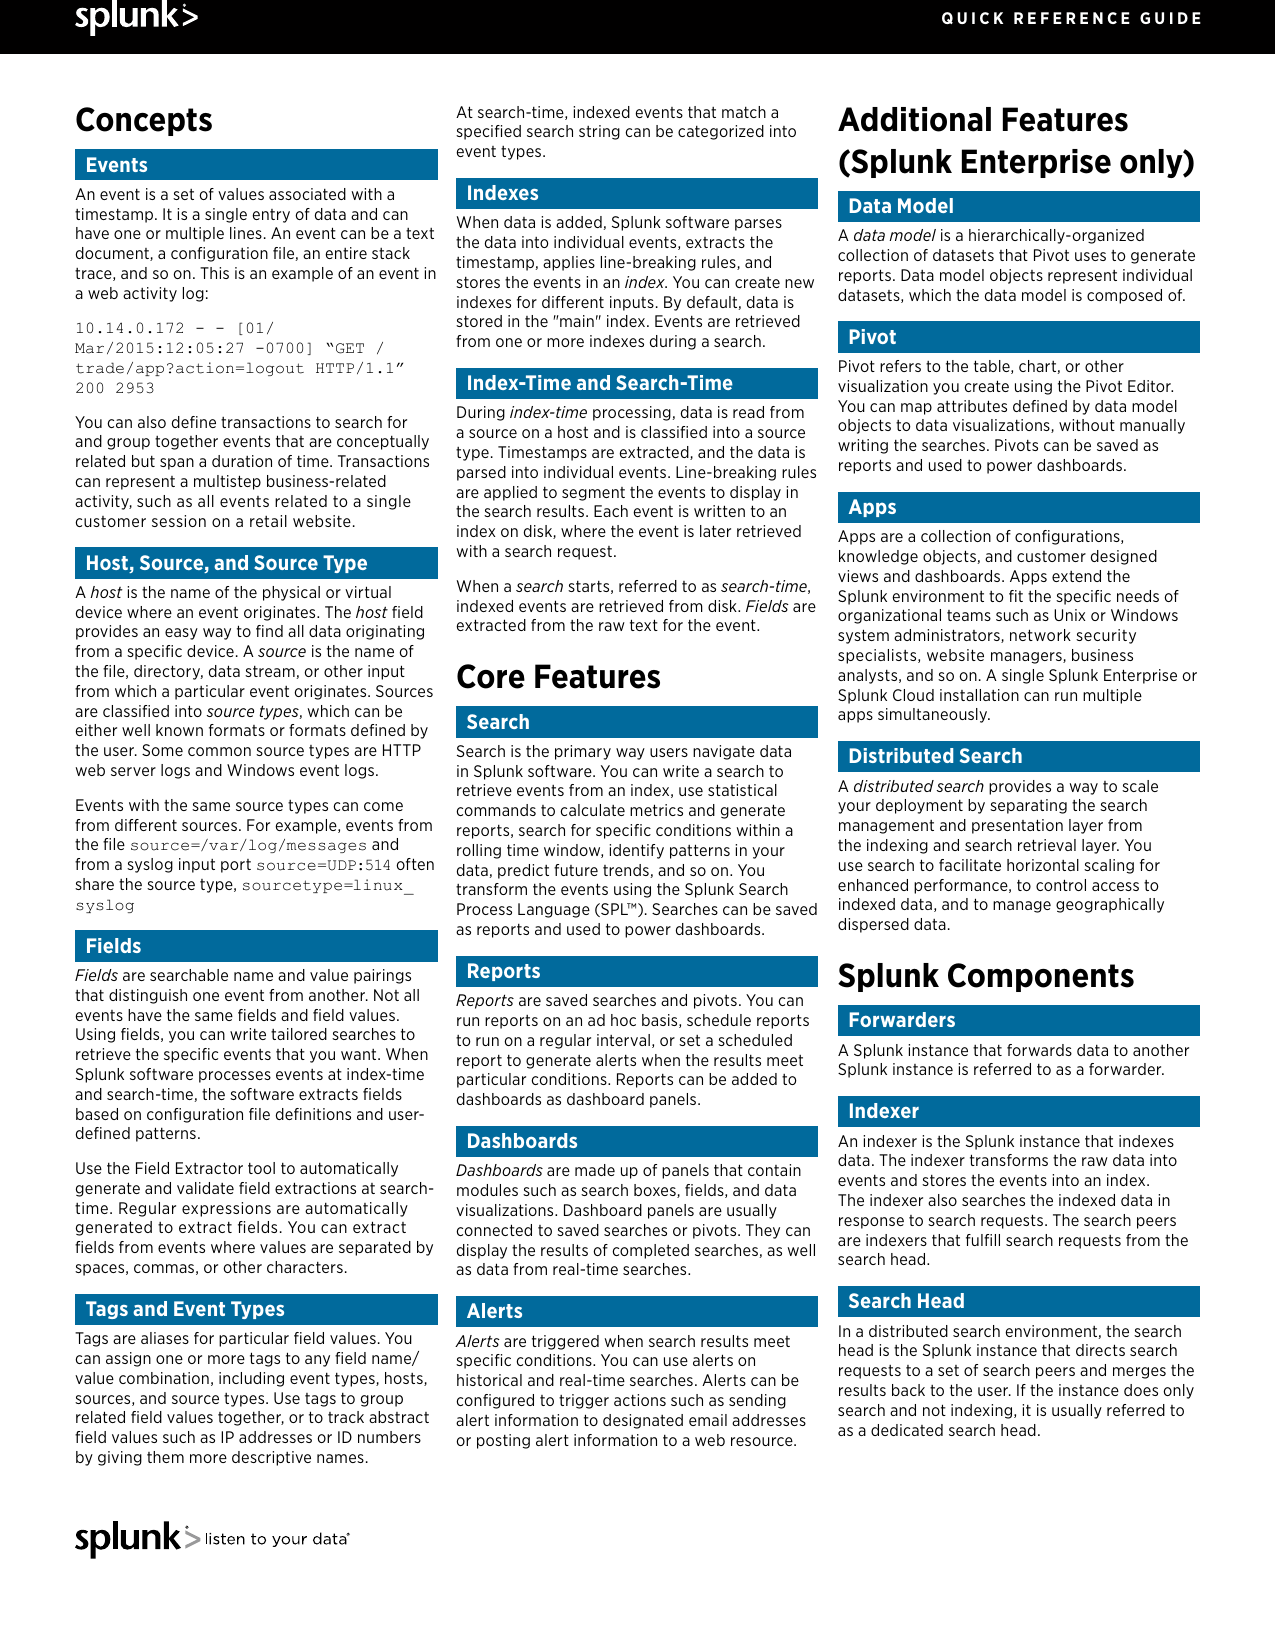 Page 1 of 6 - Splunk Quick Reference Guide